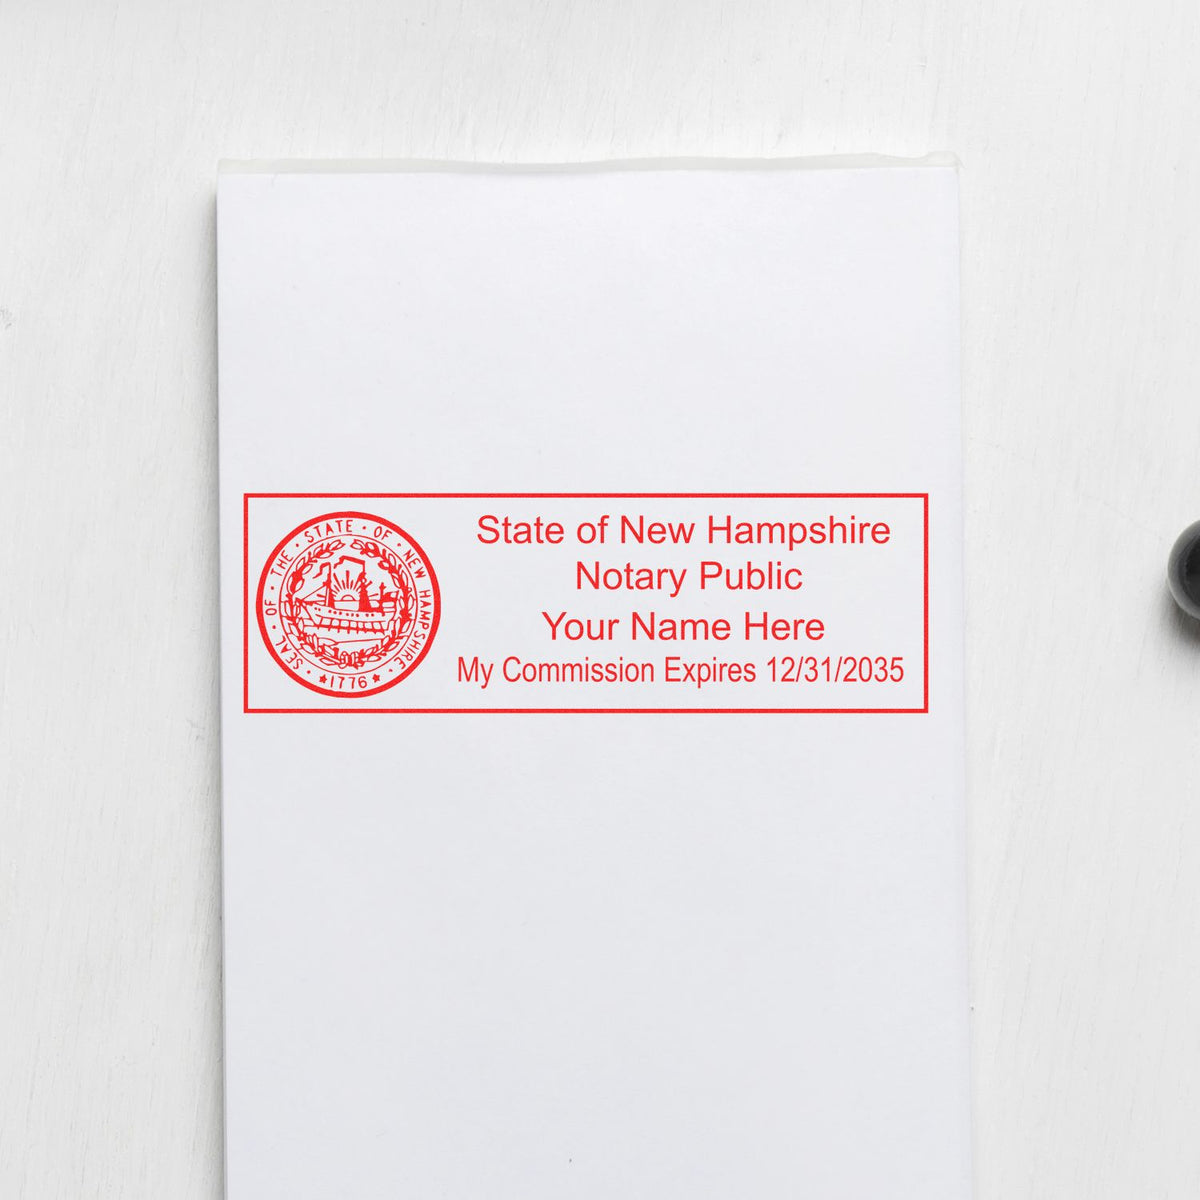 The Self-Inking State Seal New Hampshire Notary Stamp stamp impression comes to life with a crisp, detailed photo on paper - showcasing true professional quality.